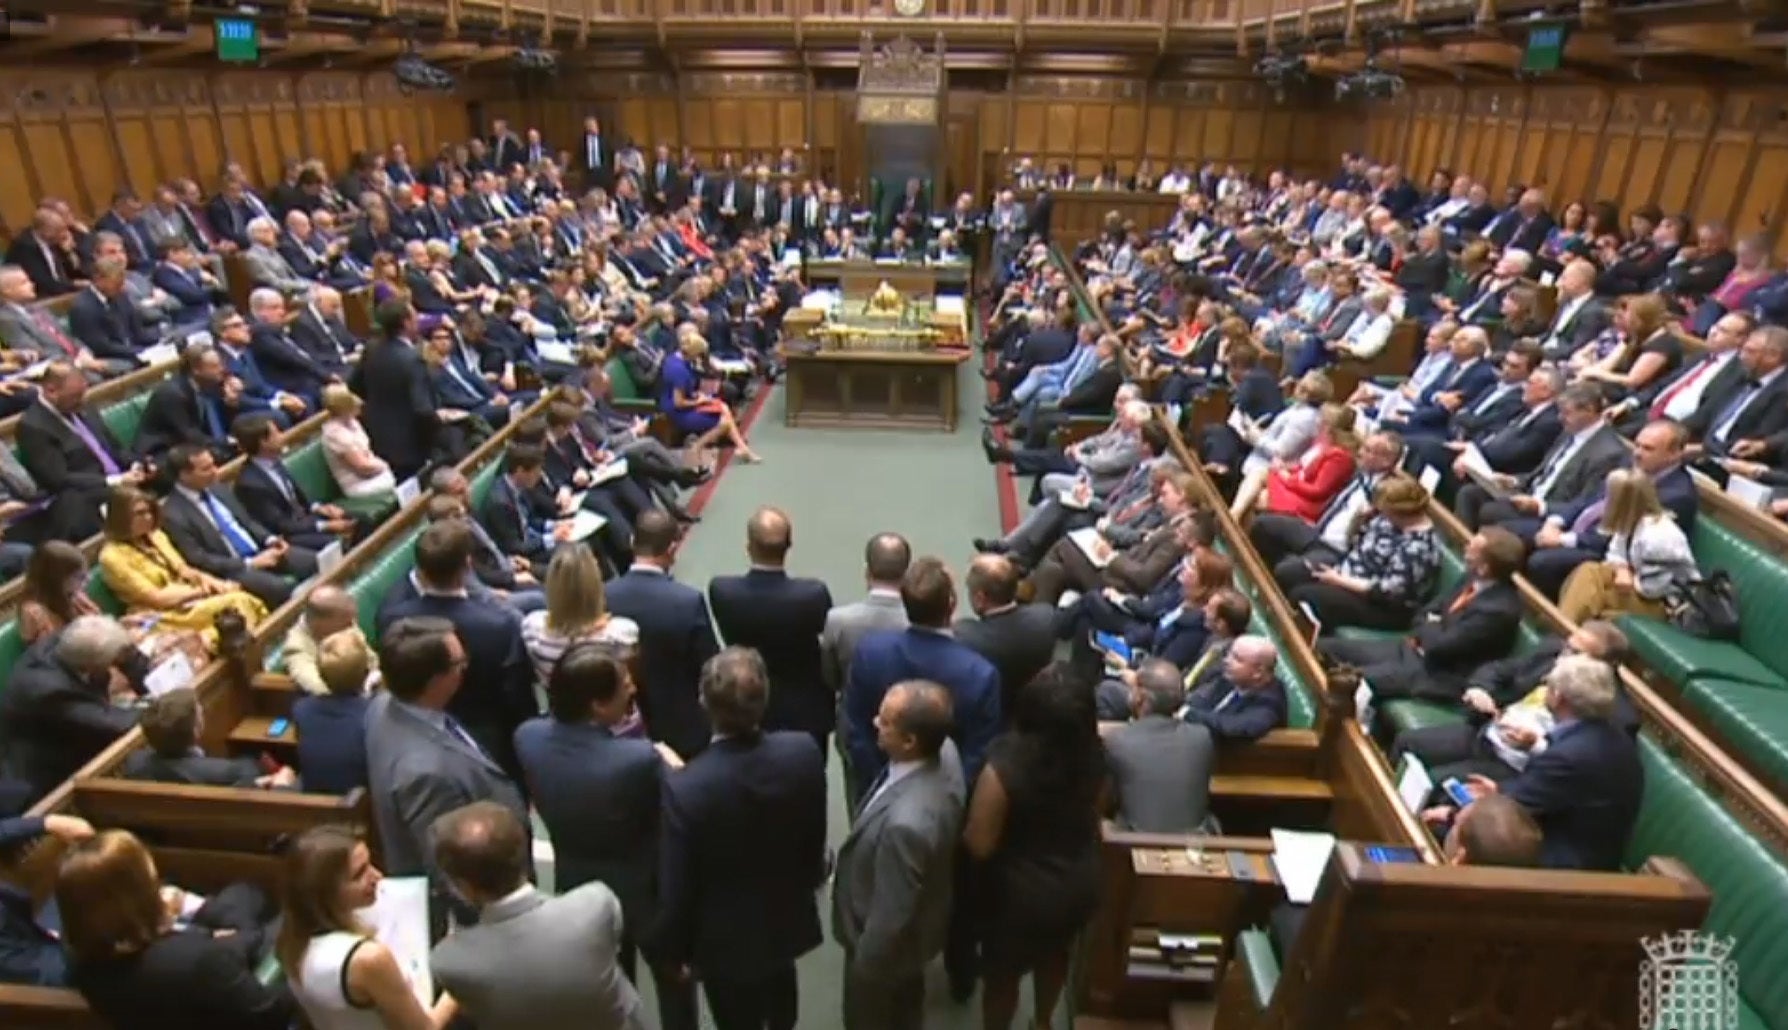 In the House of Commons, the Brexiteers were given a chance to keep their promises, and yet again, they said no